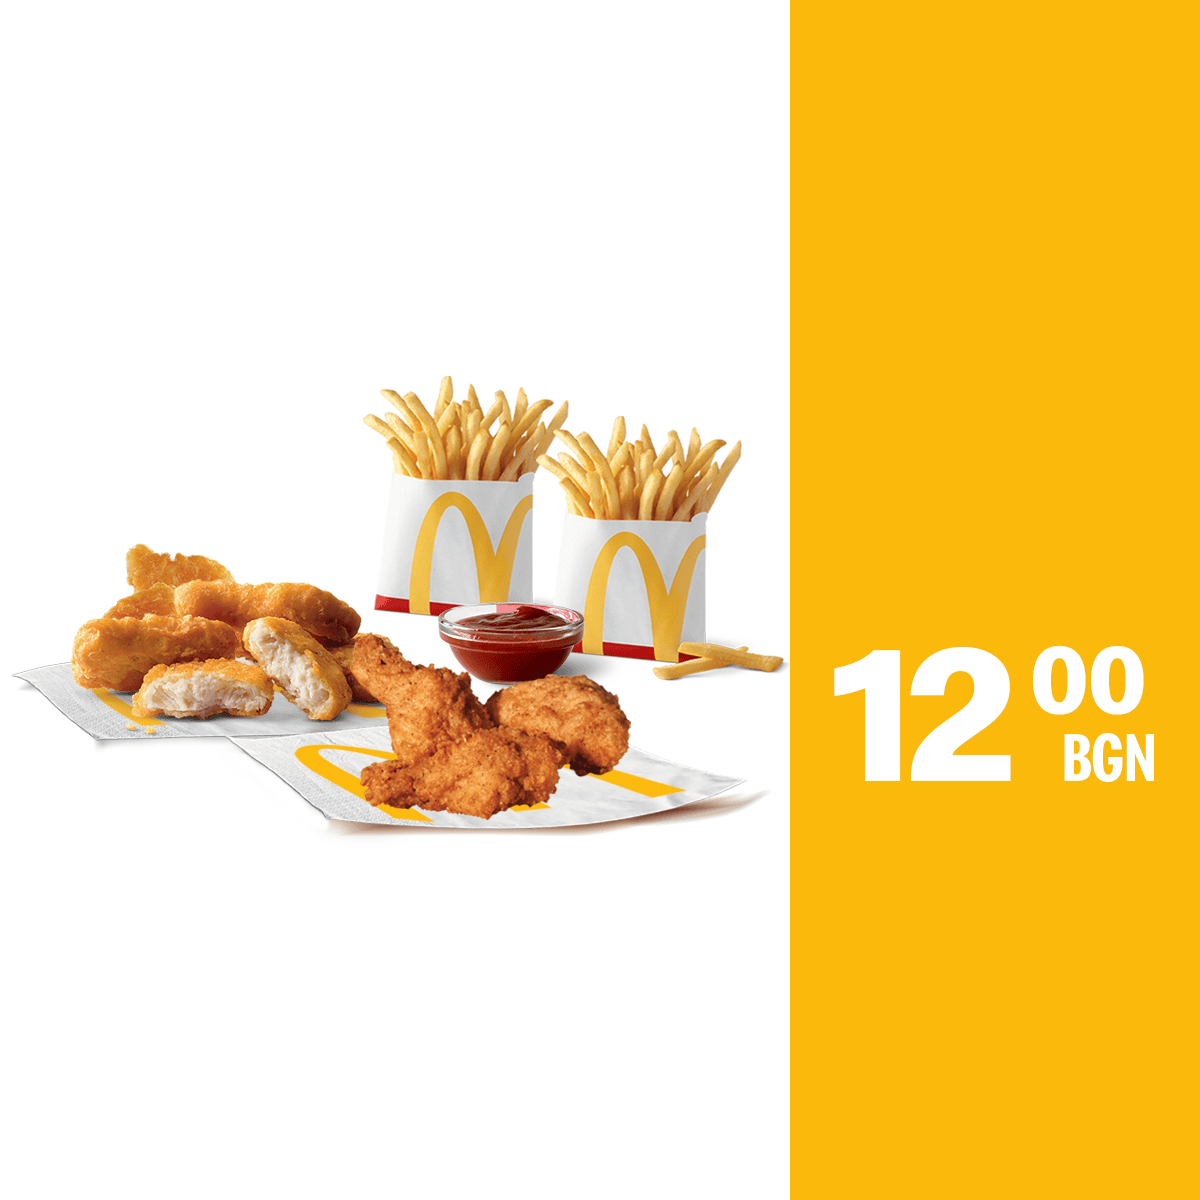 6-chicken-mcnugets-sauce-3-chicken-wings-2x-small-fries-eng (1)